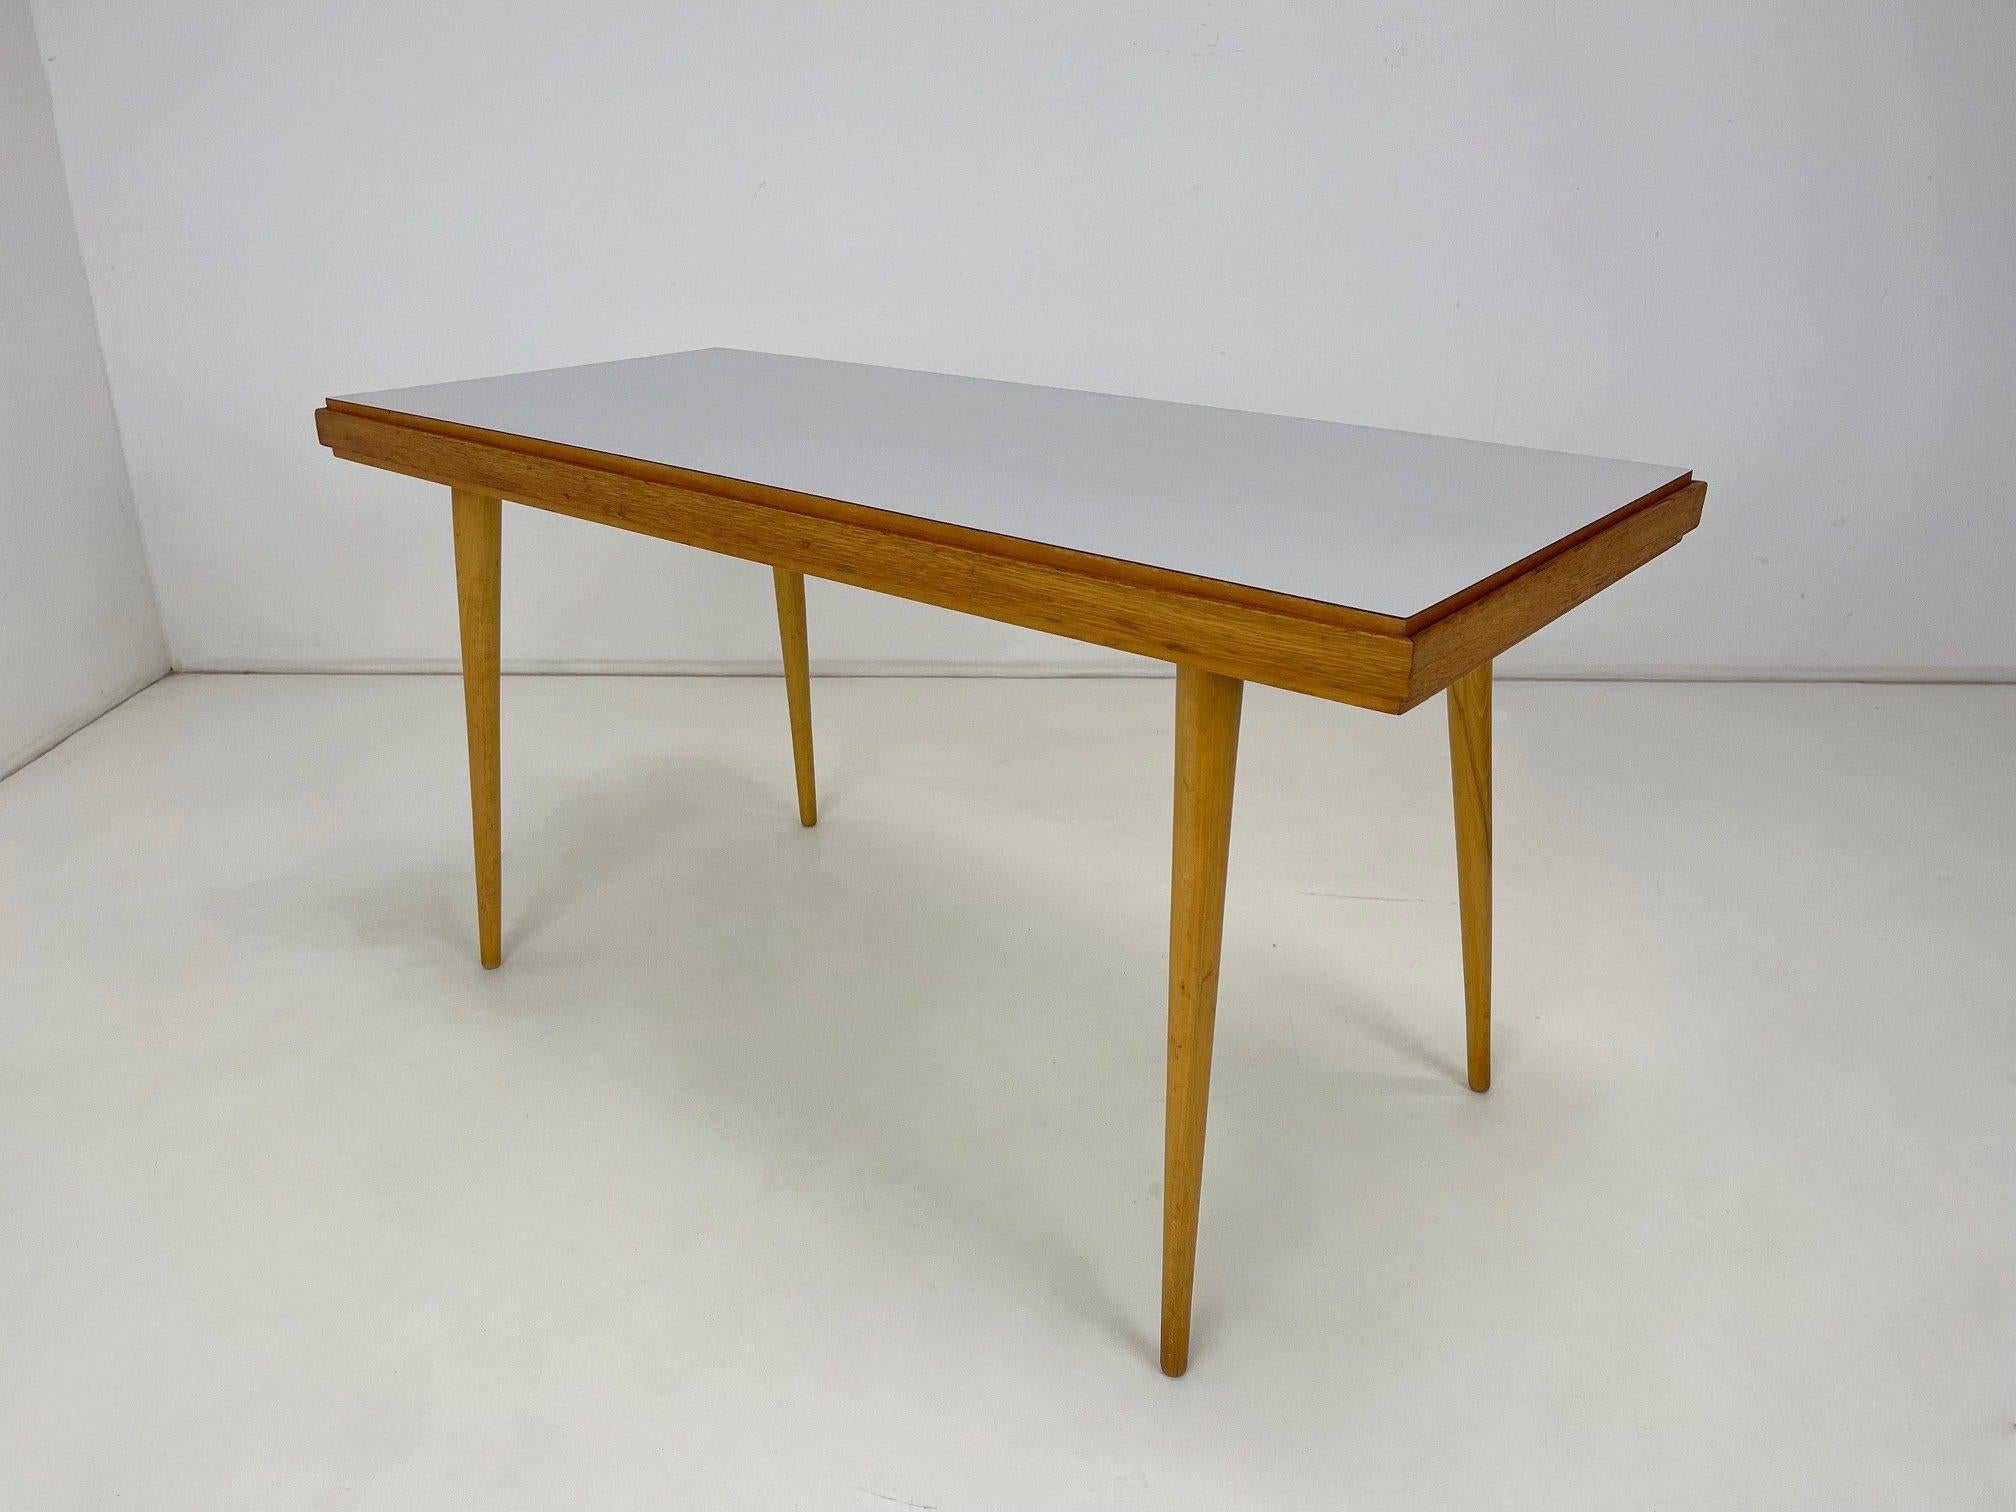 Vintage coffee table from former Czechoslovakia. The top can be flipped with yellow formica on one side and white on the other.